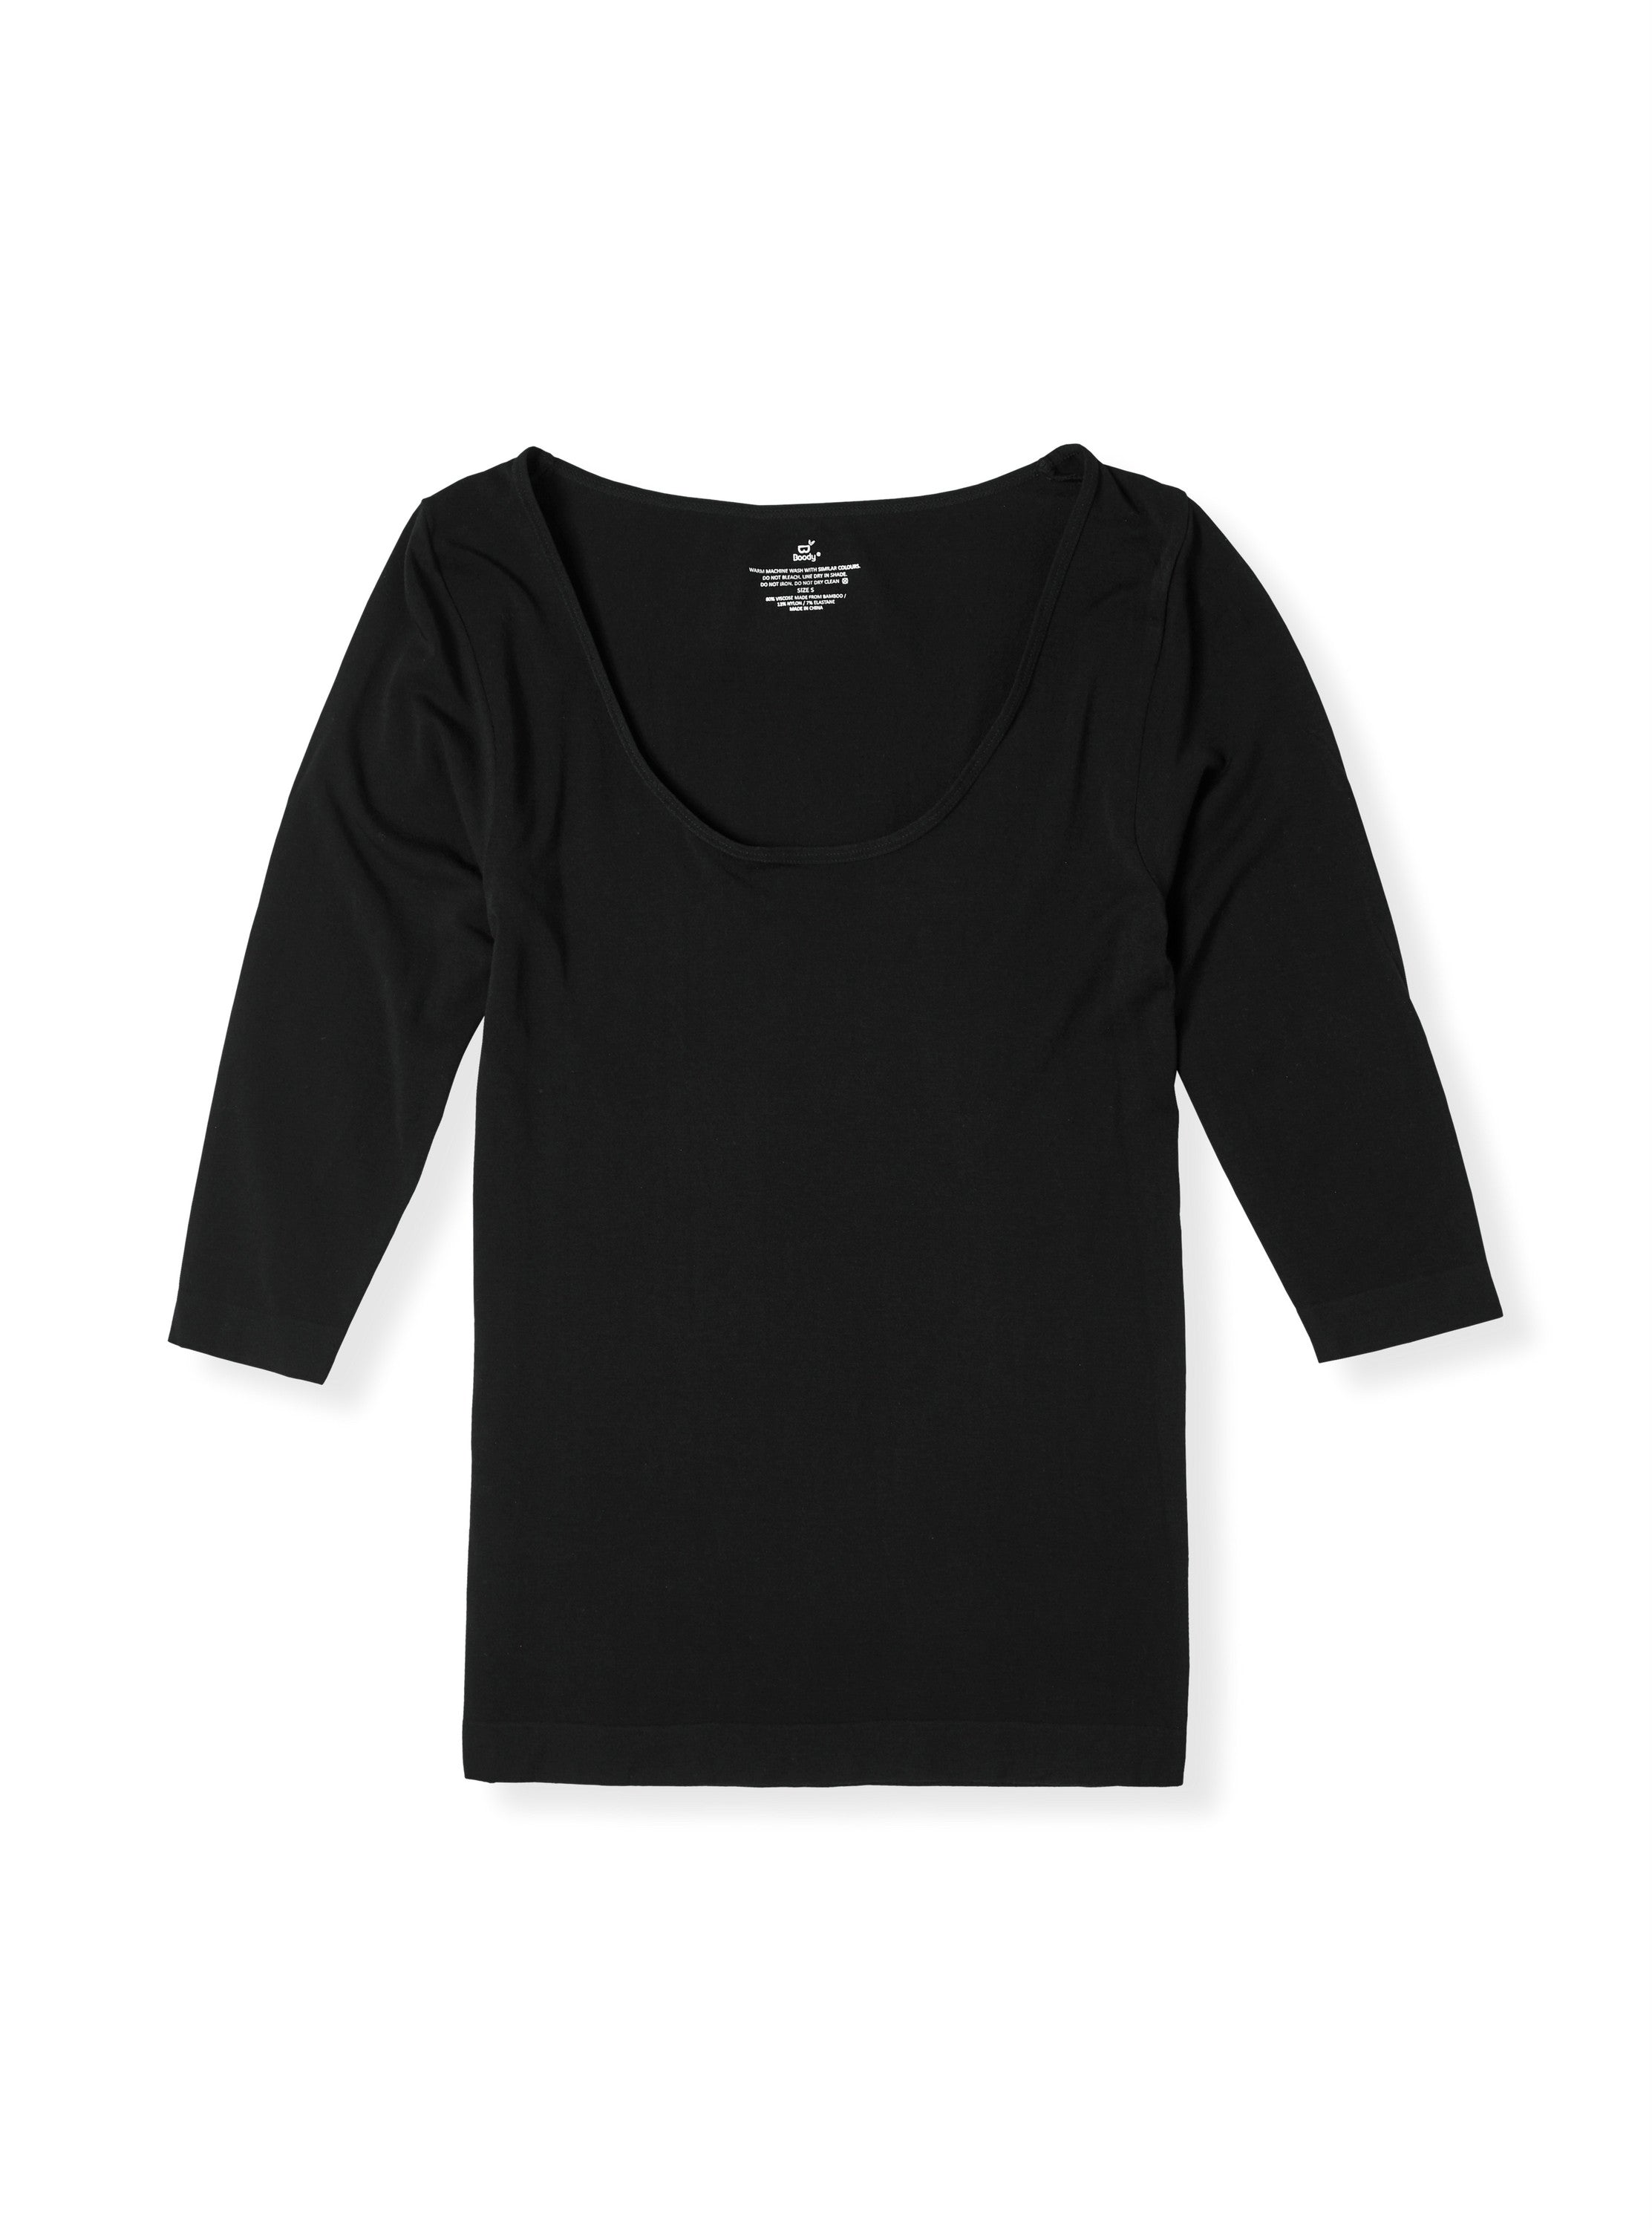 Boody Bamboo Womens Scoop Top in Black Flat Lay